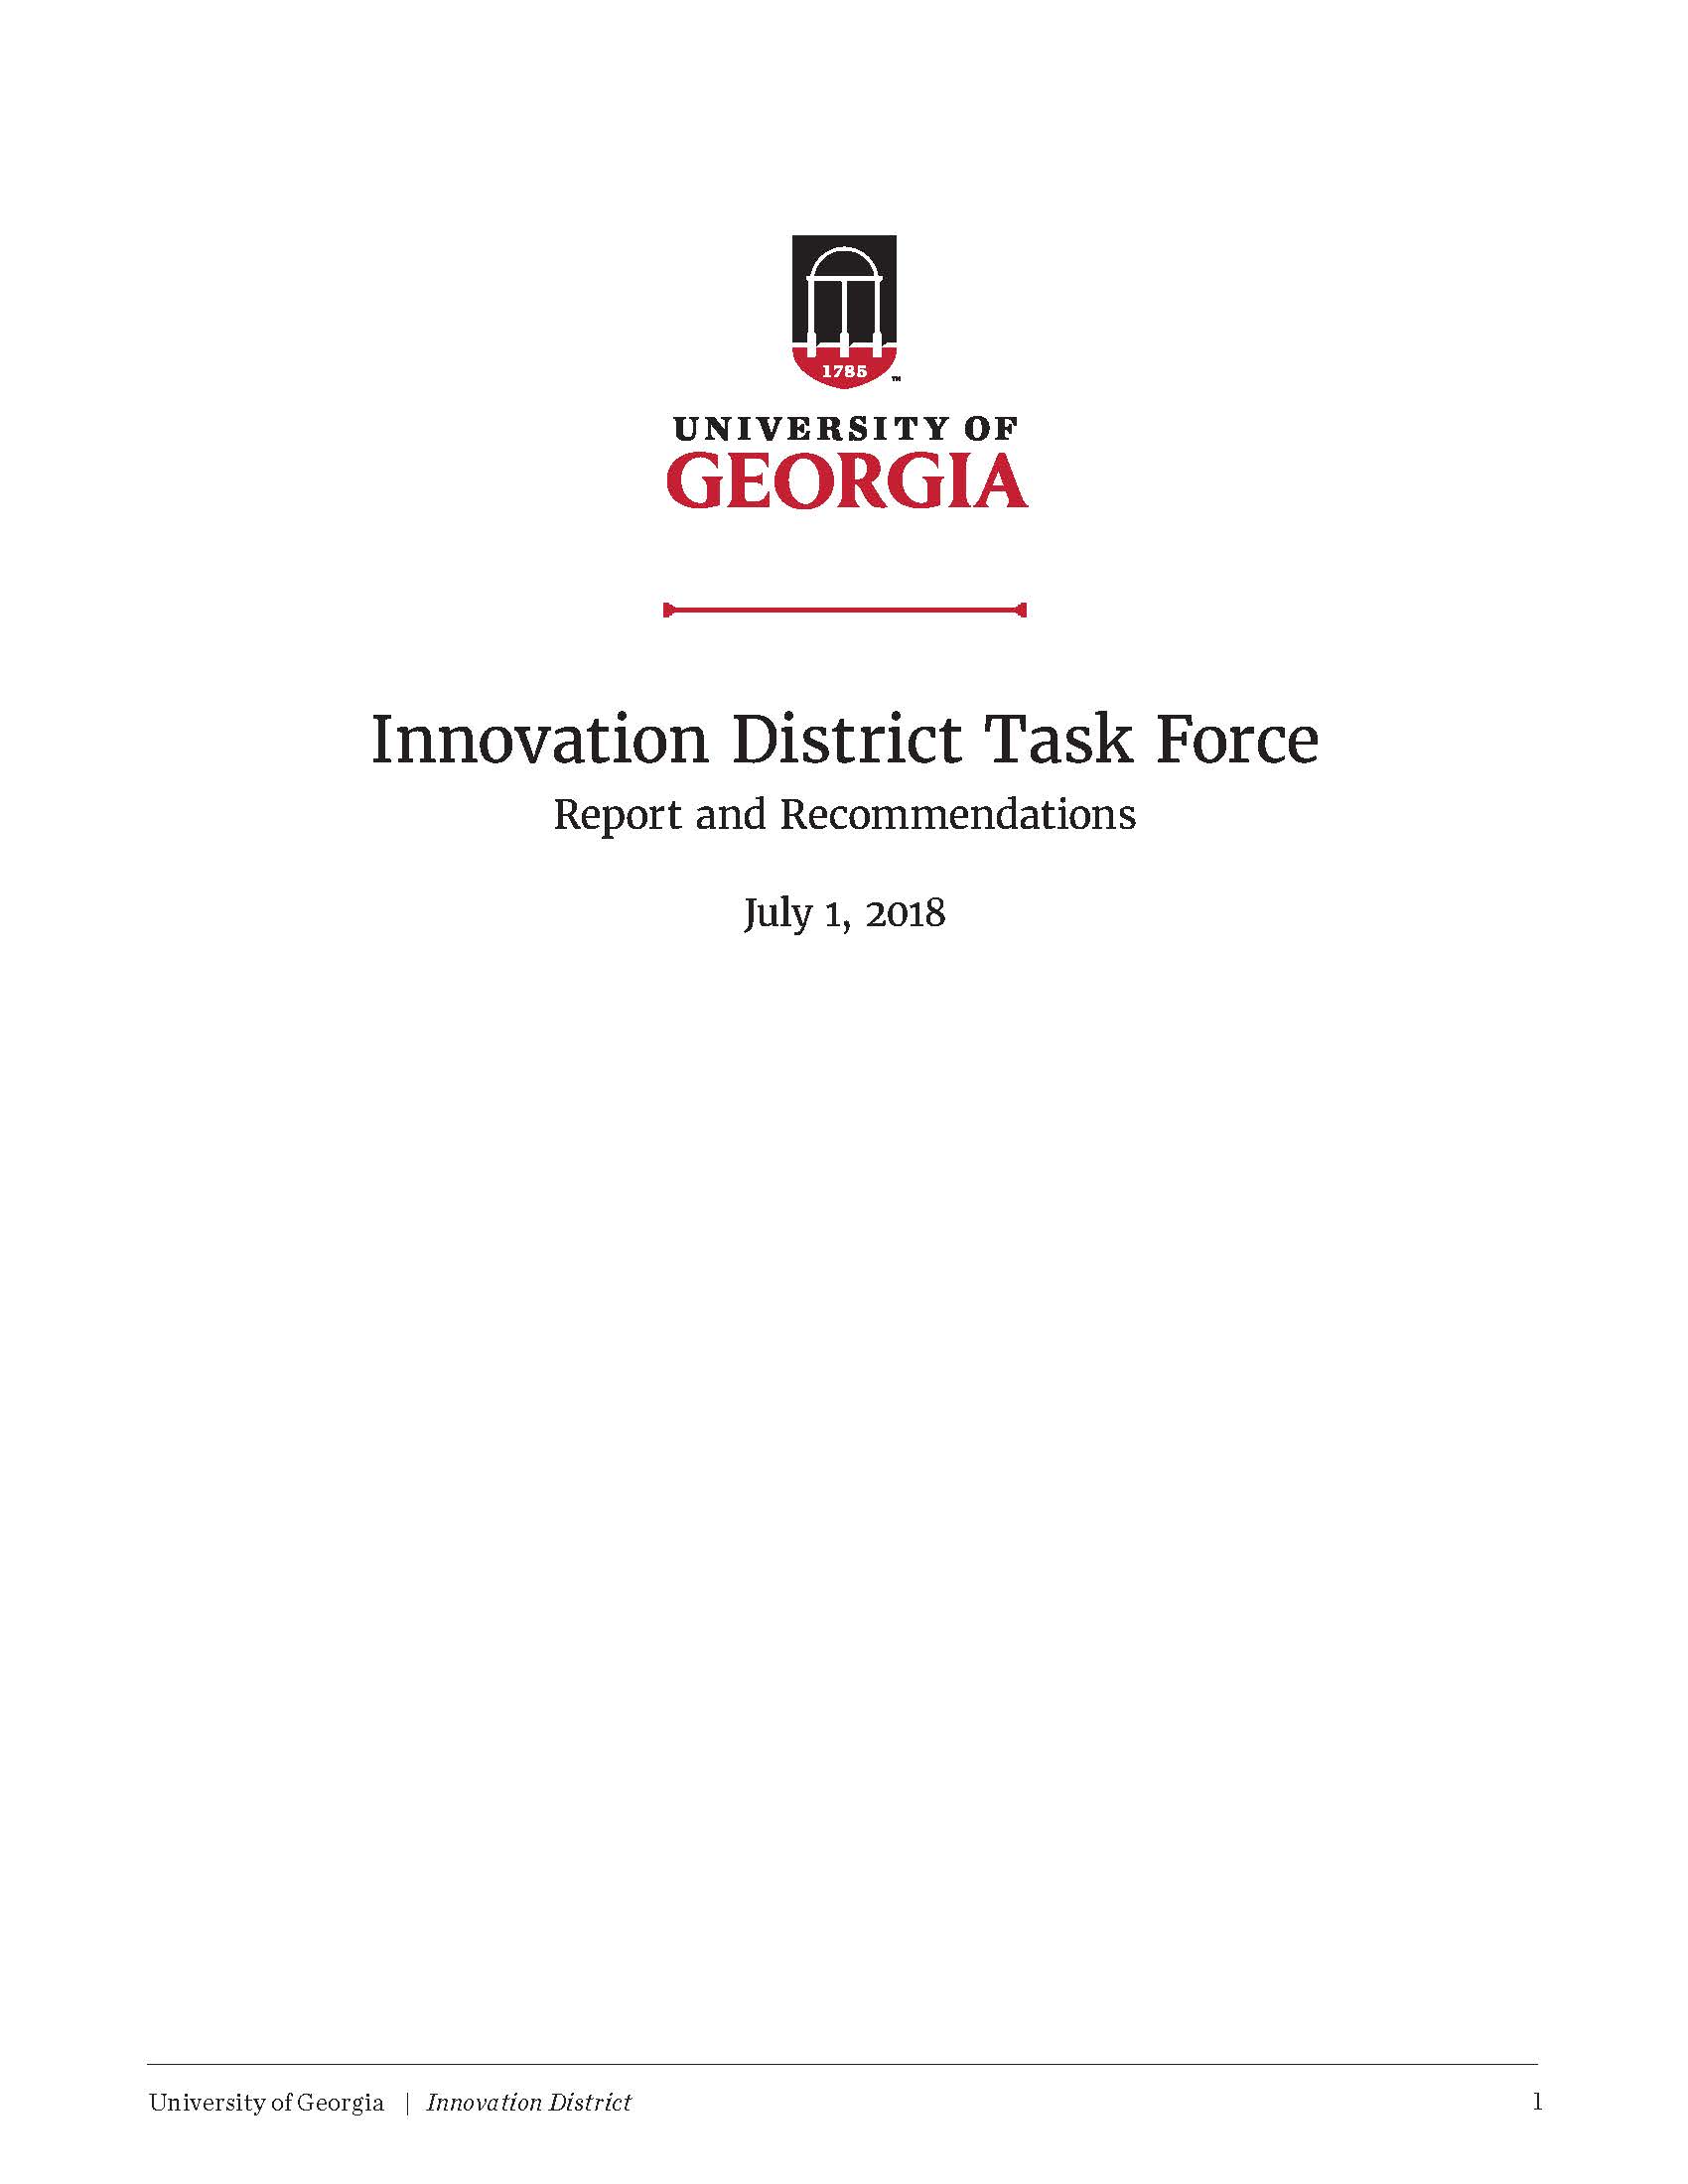 Innovation District Task Force cover page